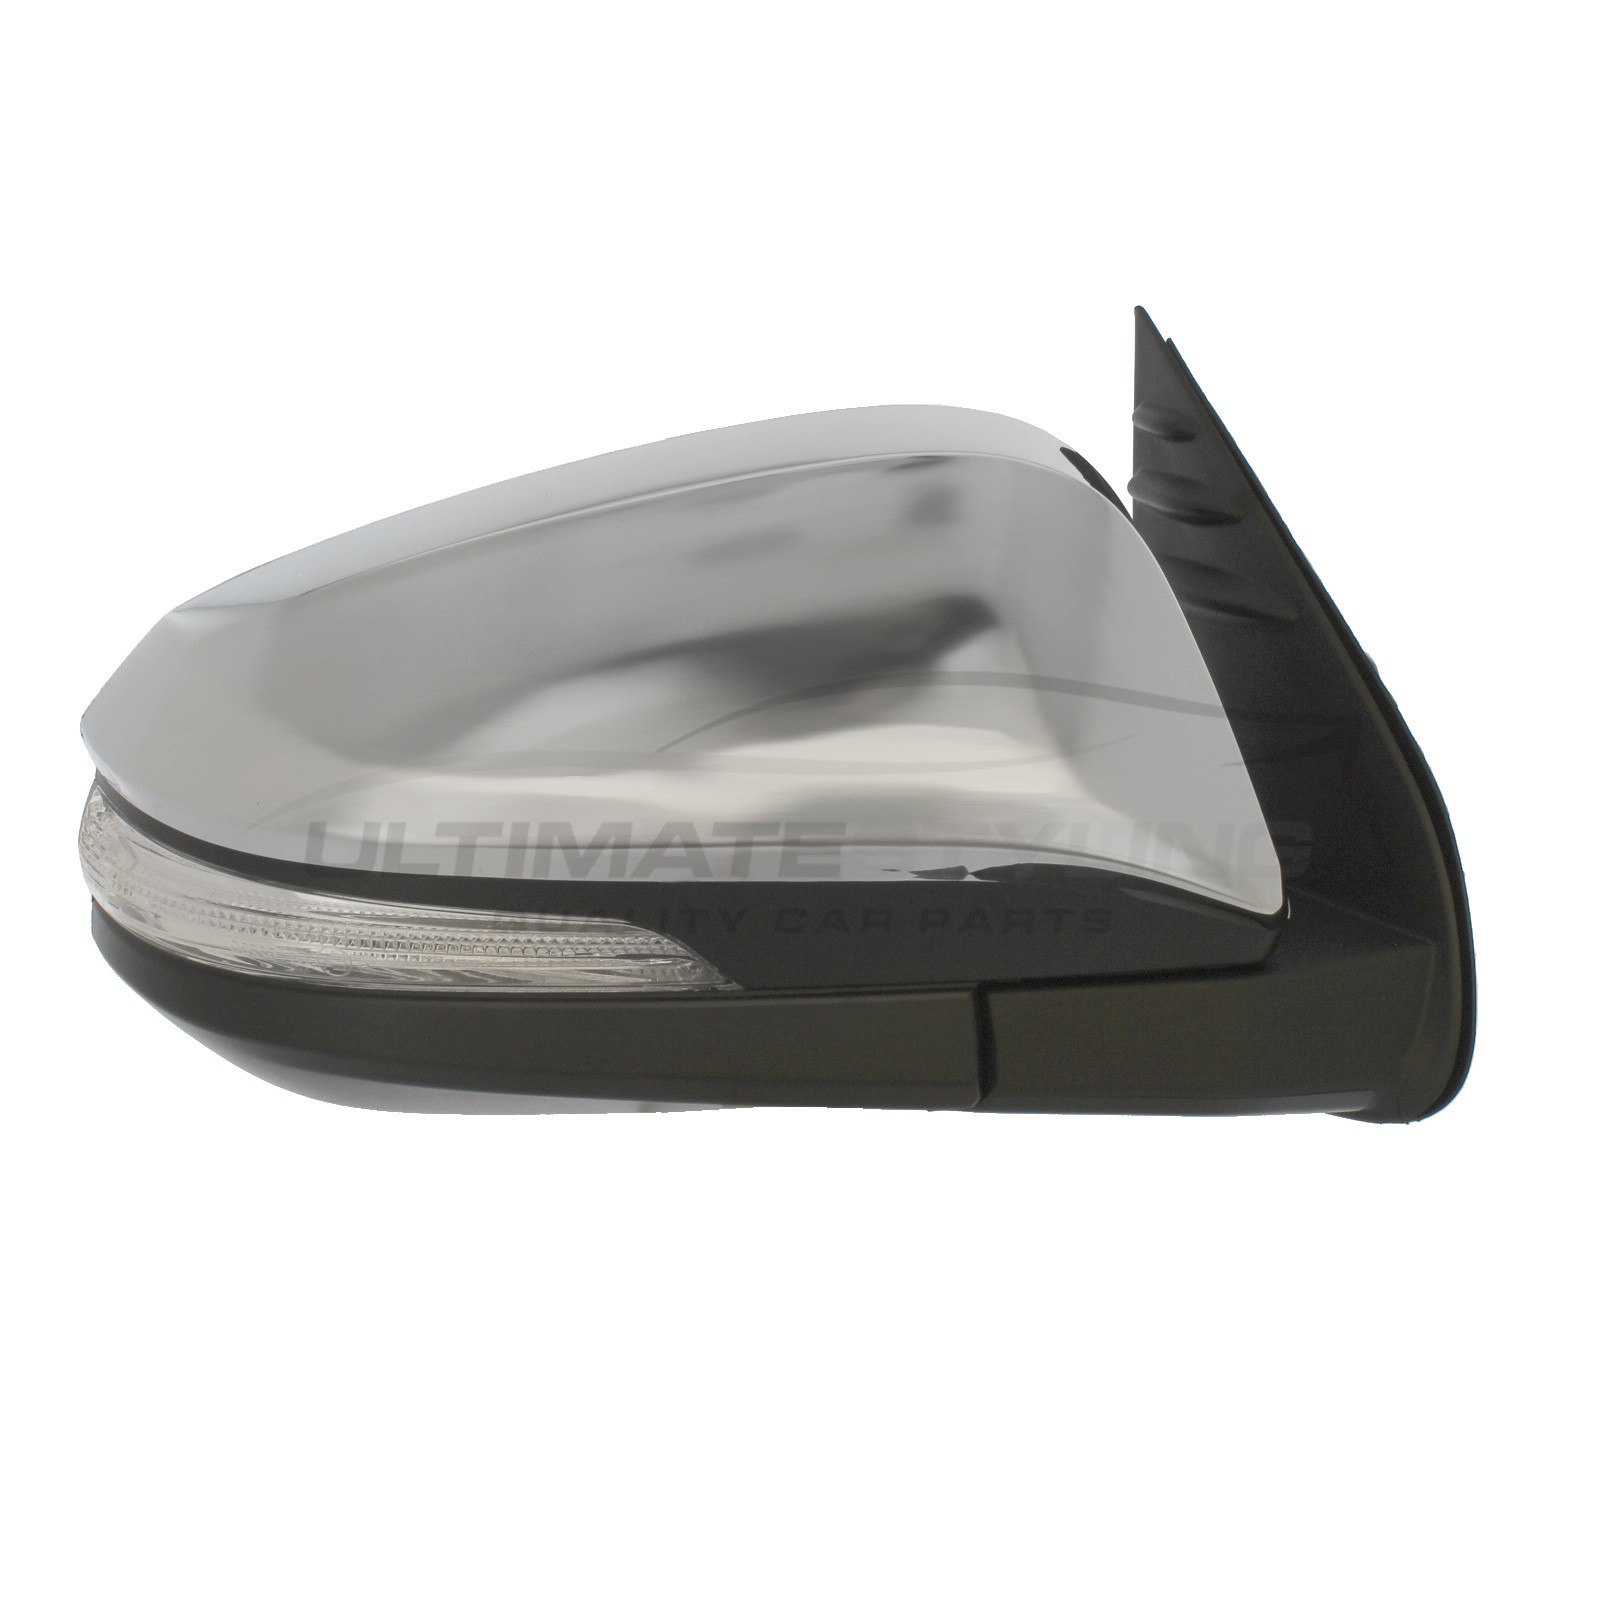 Toyota Hi-Lux Wing Mirror / Door Mirror - Drivers Side (RH) - Electric adjustment - Heated Glass - Power Folding - Indicator - Chrome Finish